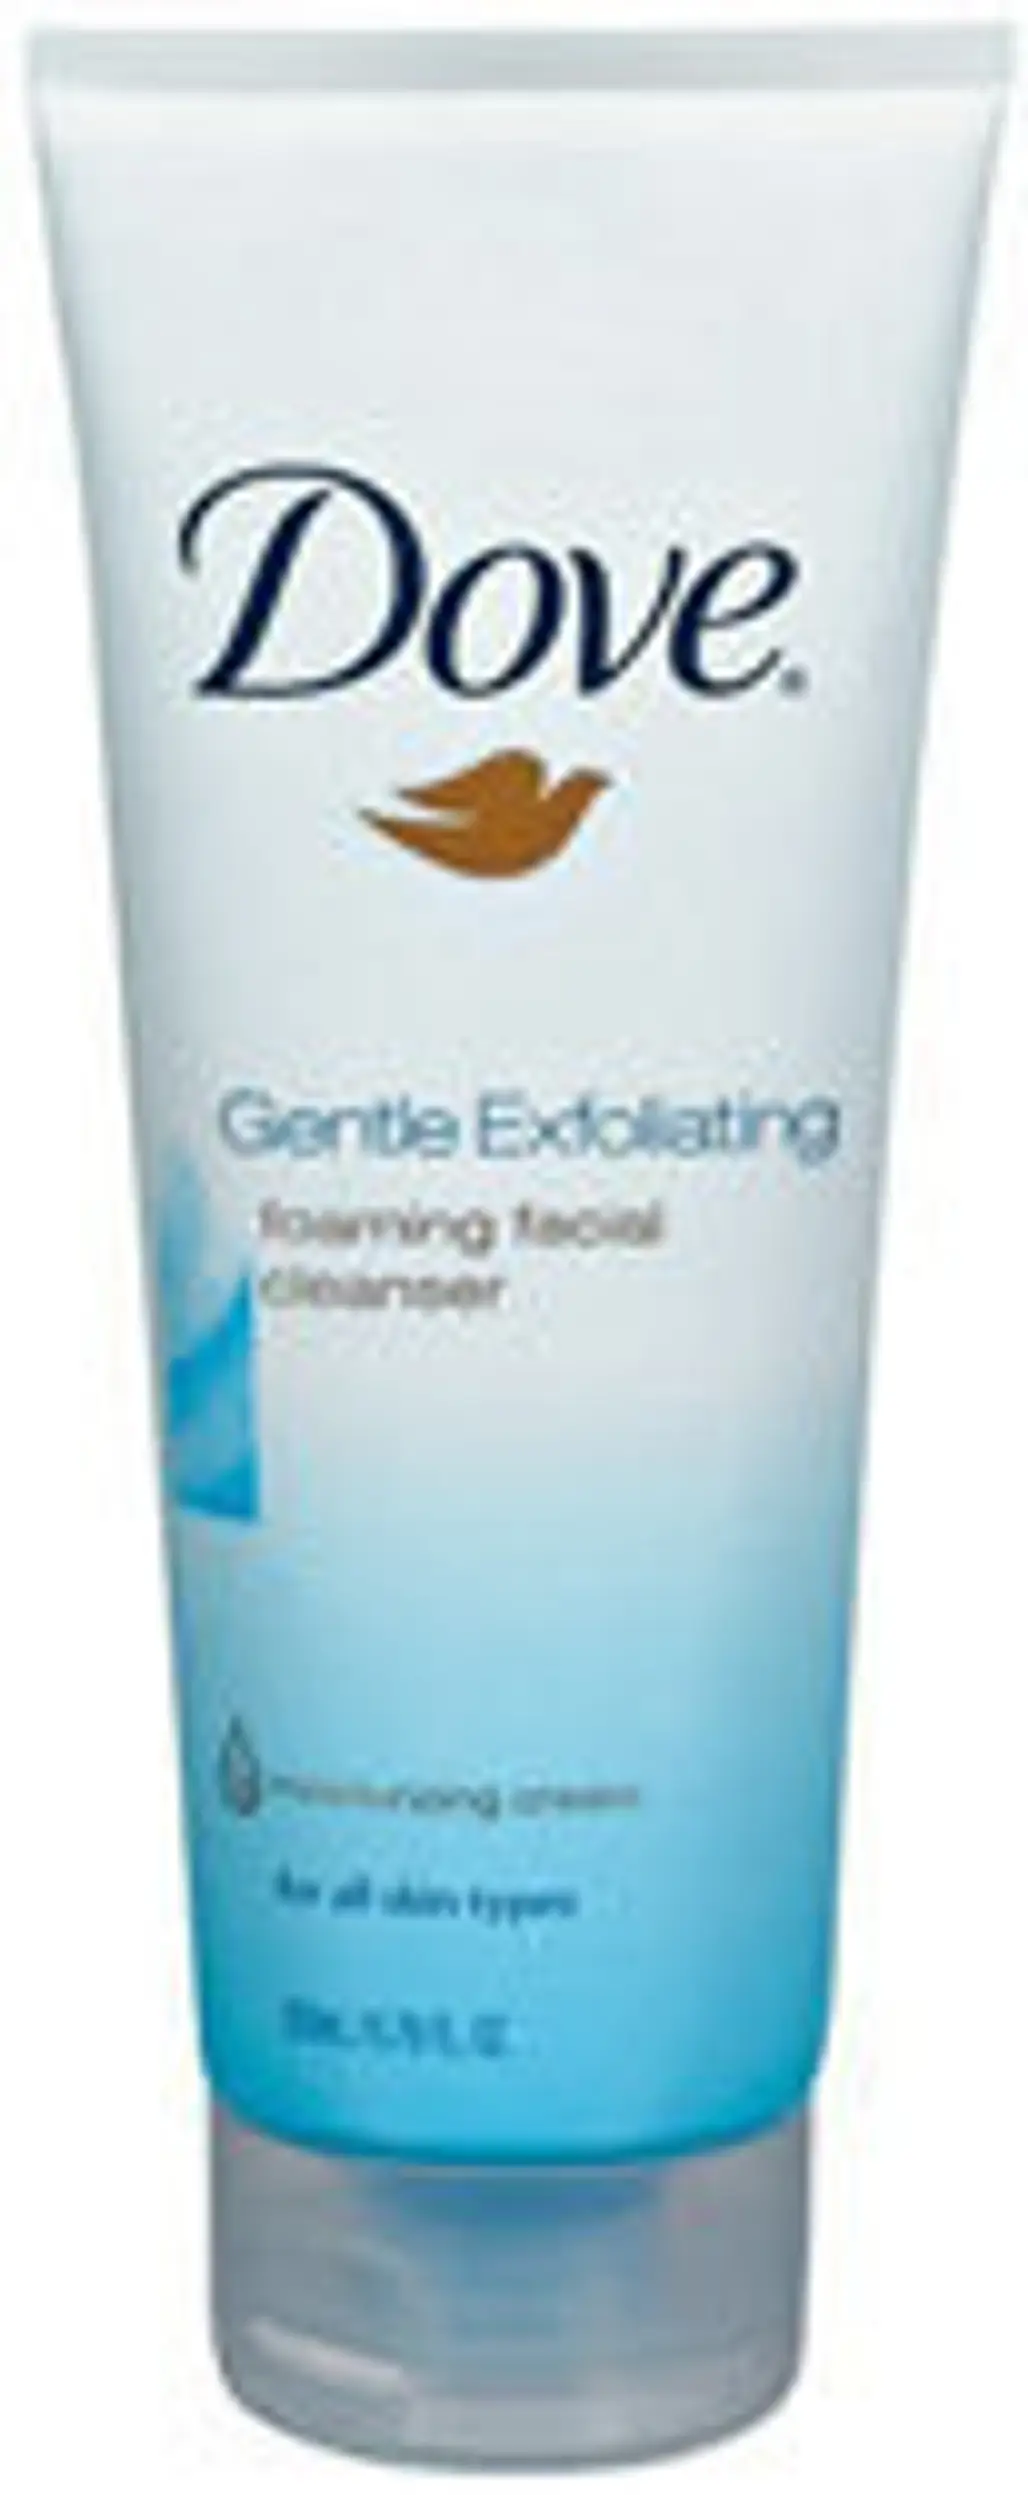 Dove Gentle Exfoliating Foaming Facial Cleanser